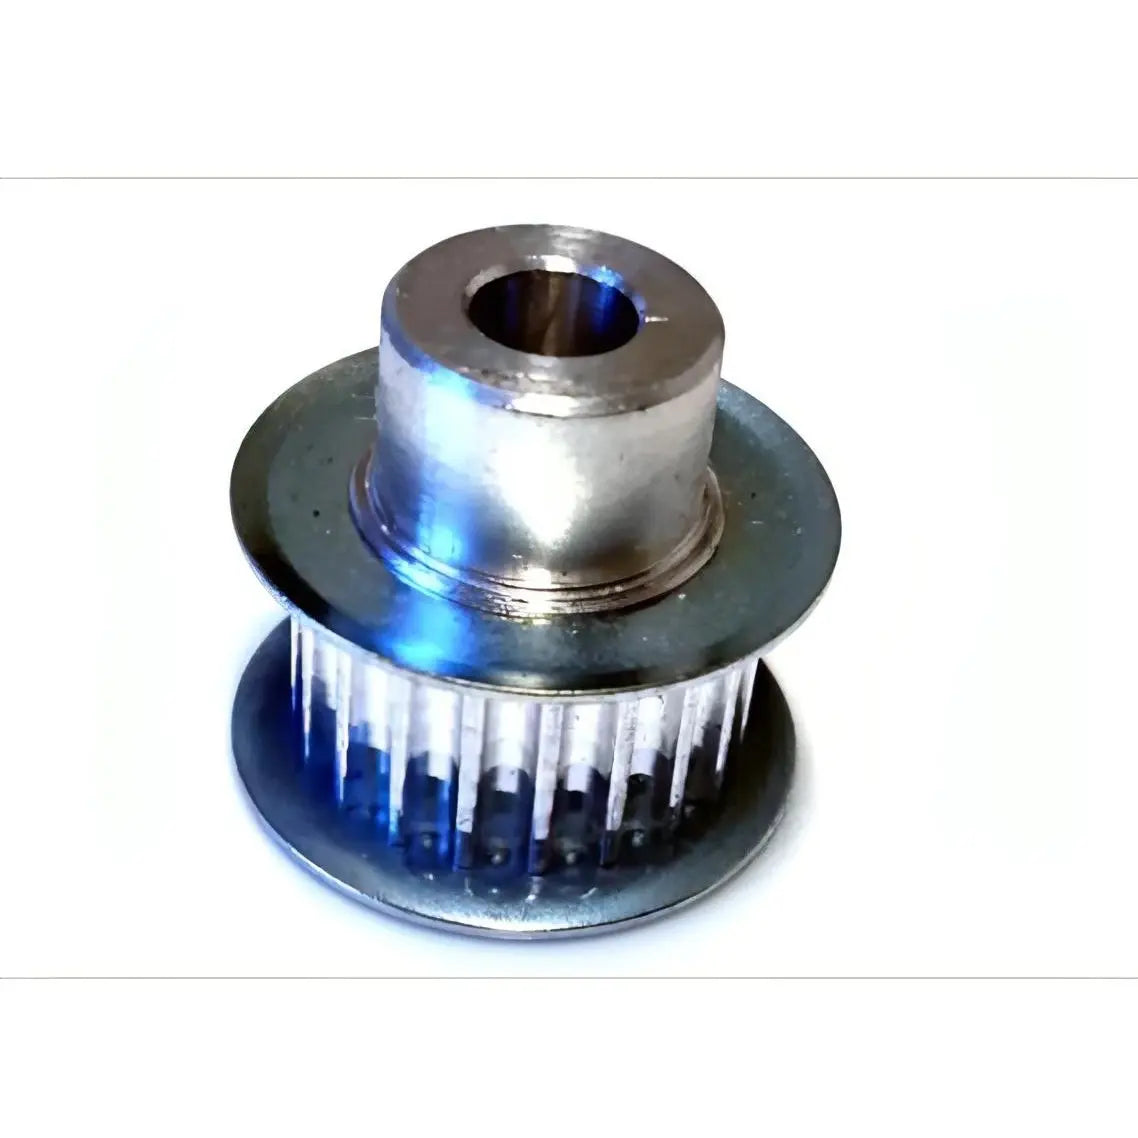 3GT Timing Pulley 20Teeth 6mm Bore NC Parts 3GT Timing Pulley 20Teeth 6mm Bore 3D Print Creativity